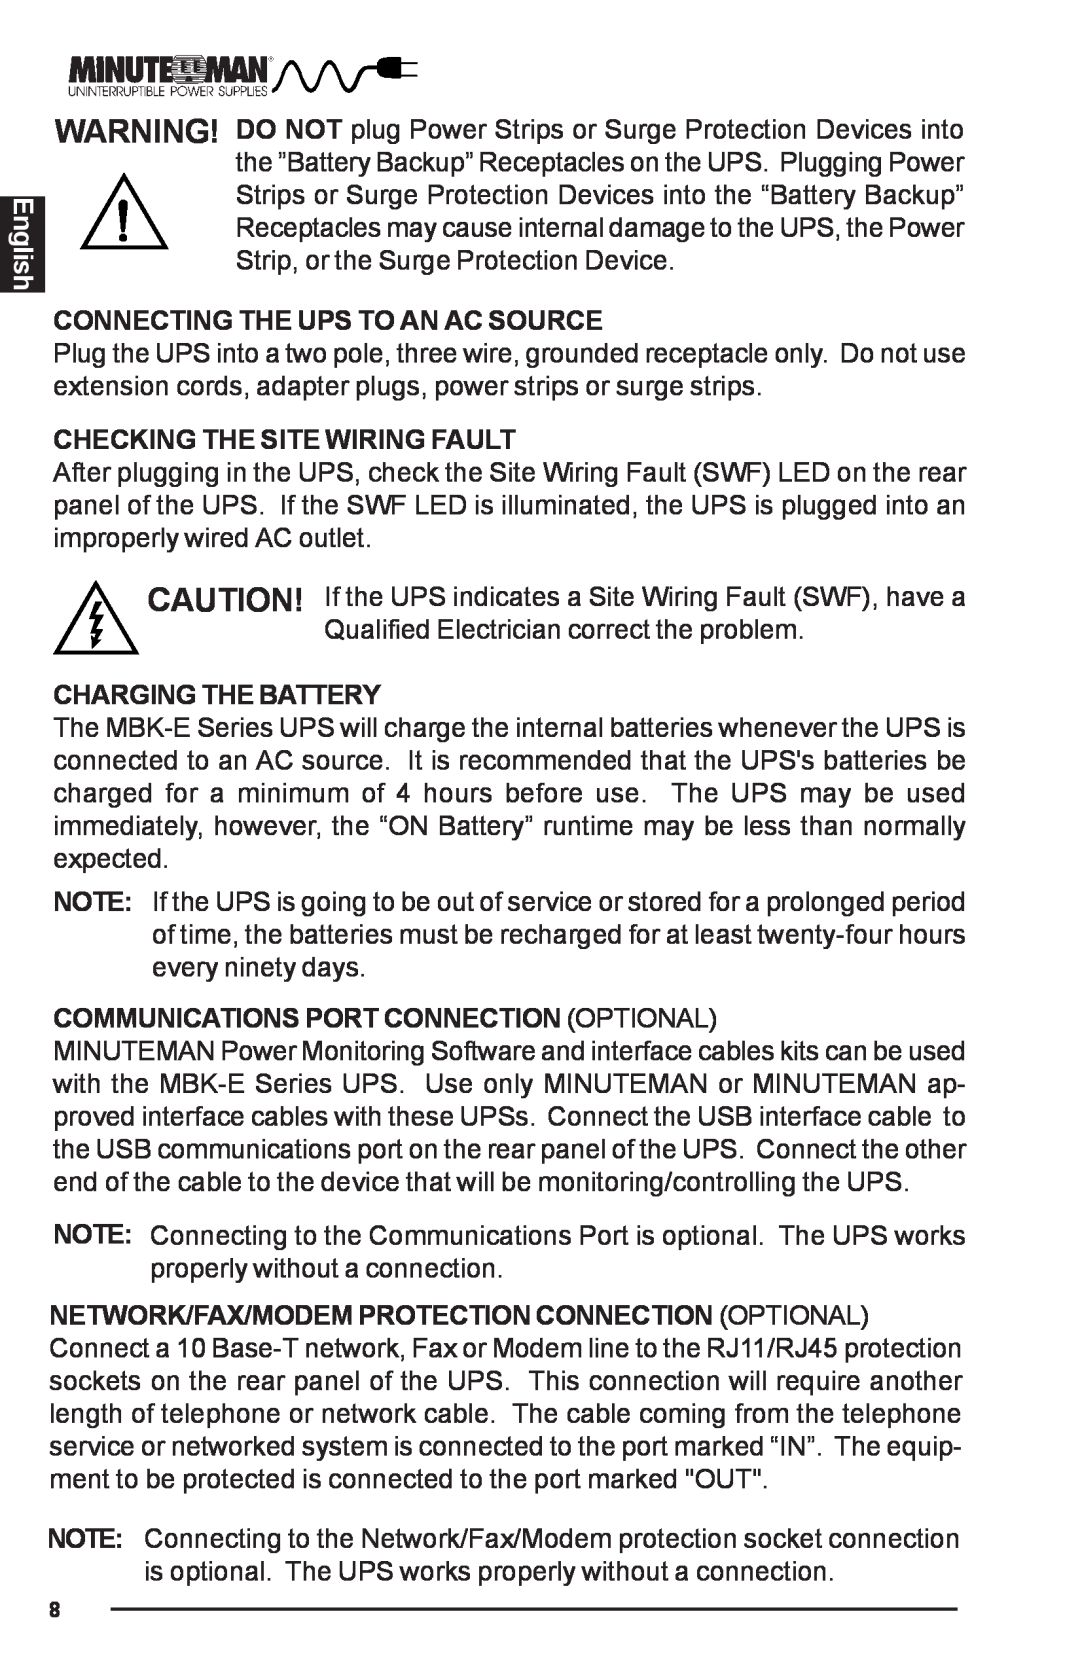 Minuteman UPS MBK-E SERIES user manual English, Connecting The Ups To An Ac Source, Checking The Site Wiring Fault 